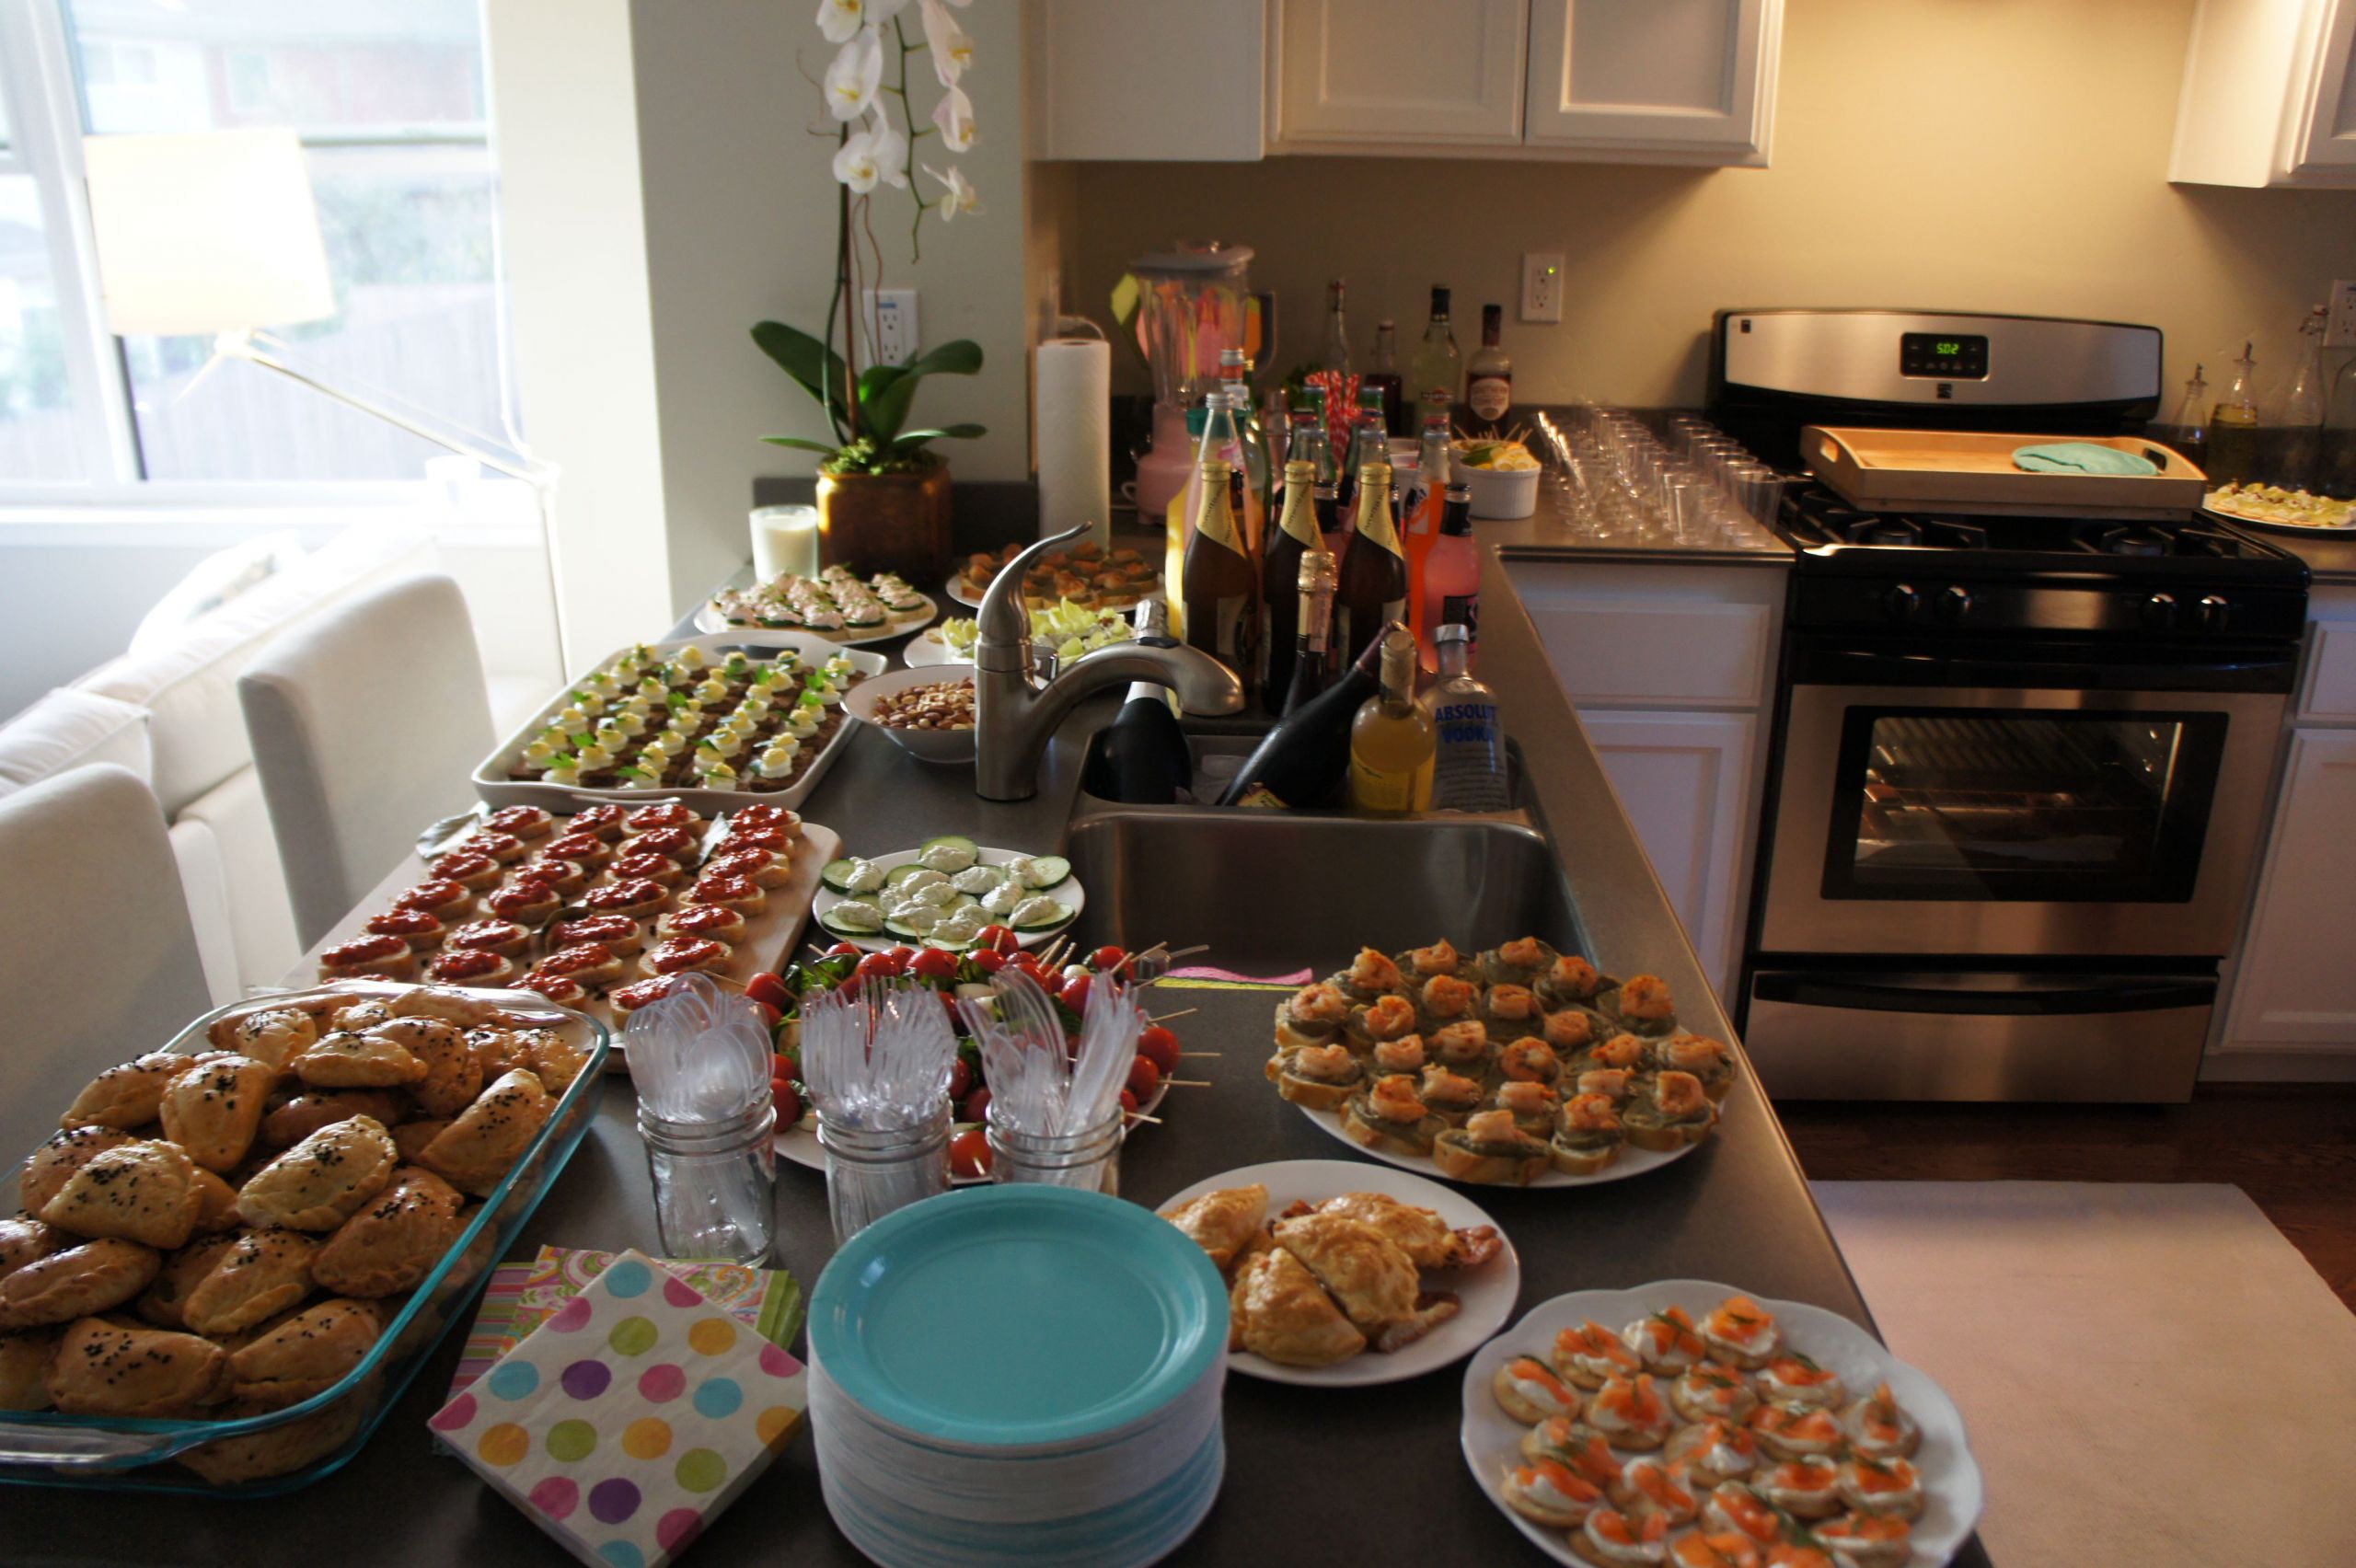 Housewarming Party Food Ideas
 our housewarming party i cooked everything in 2019